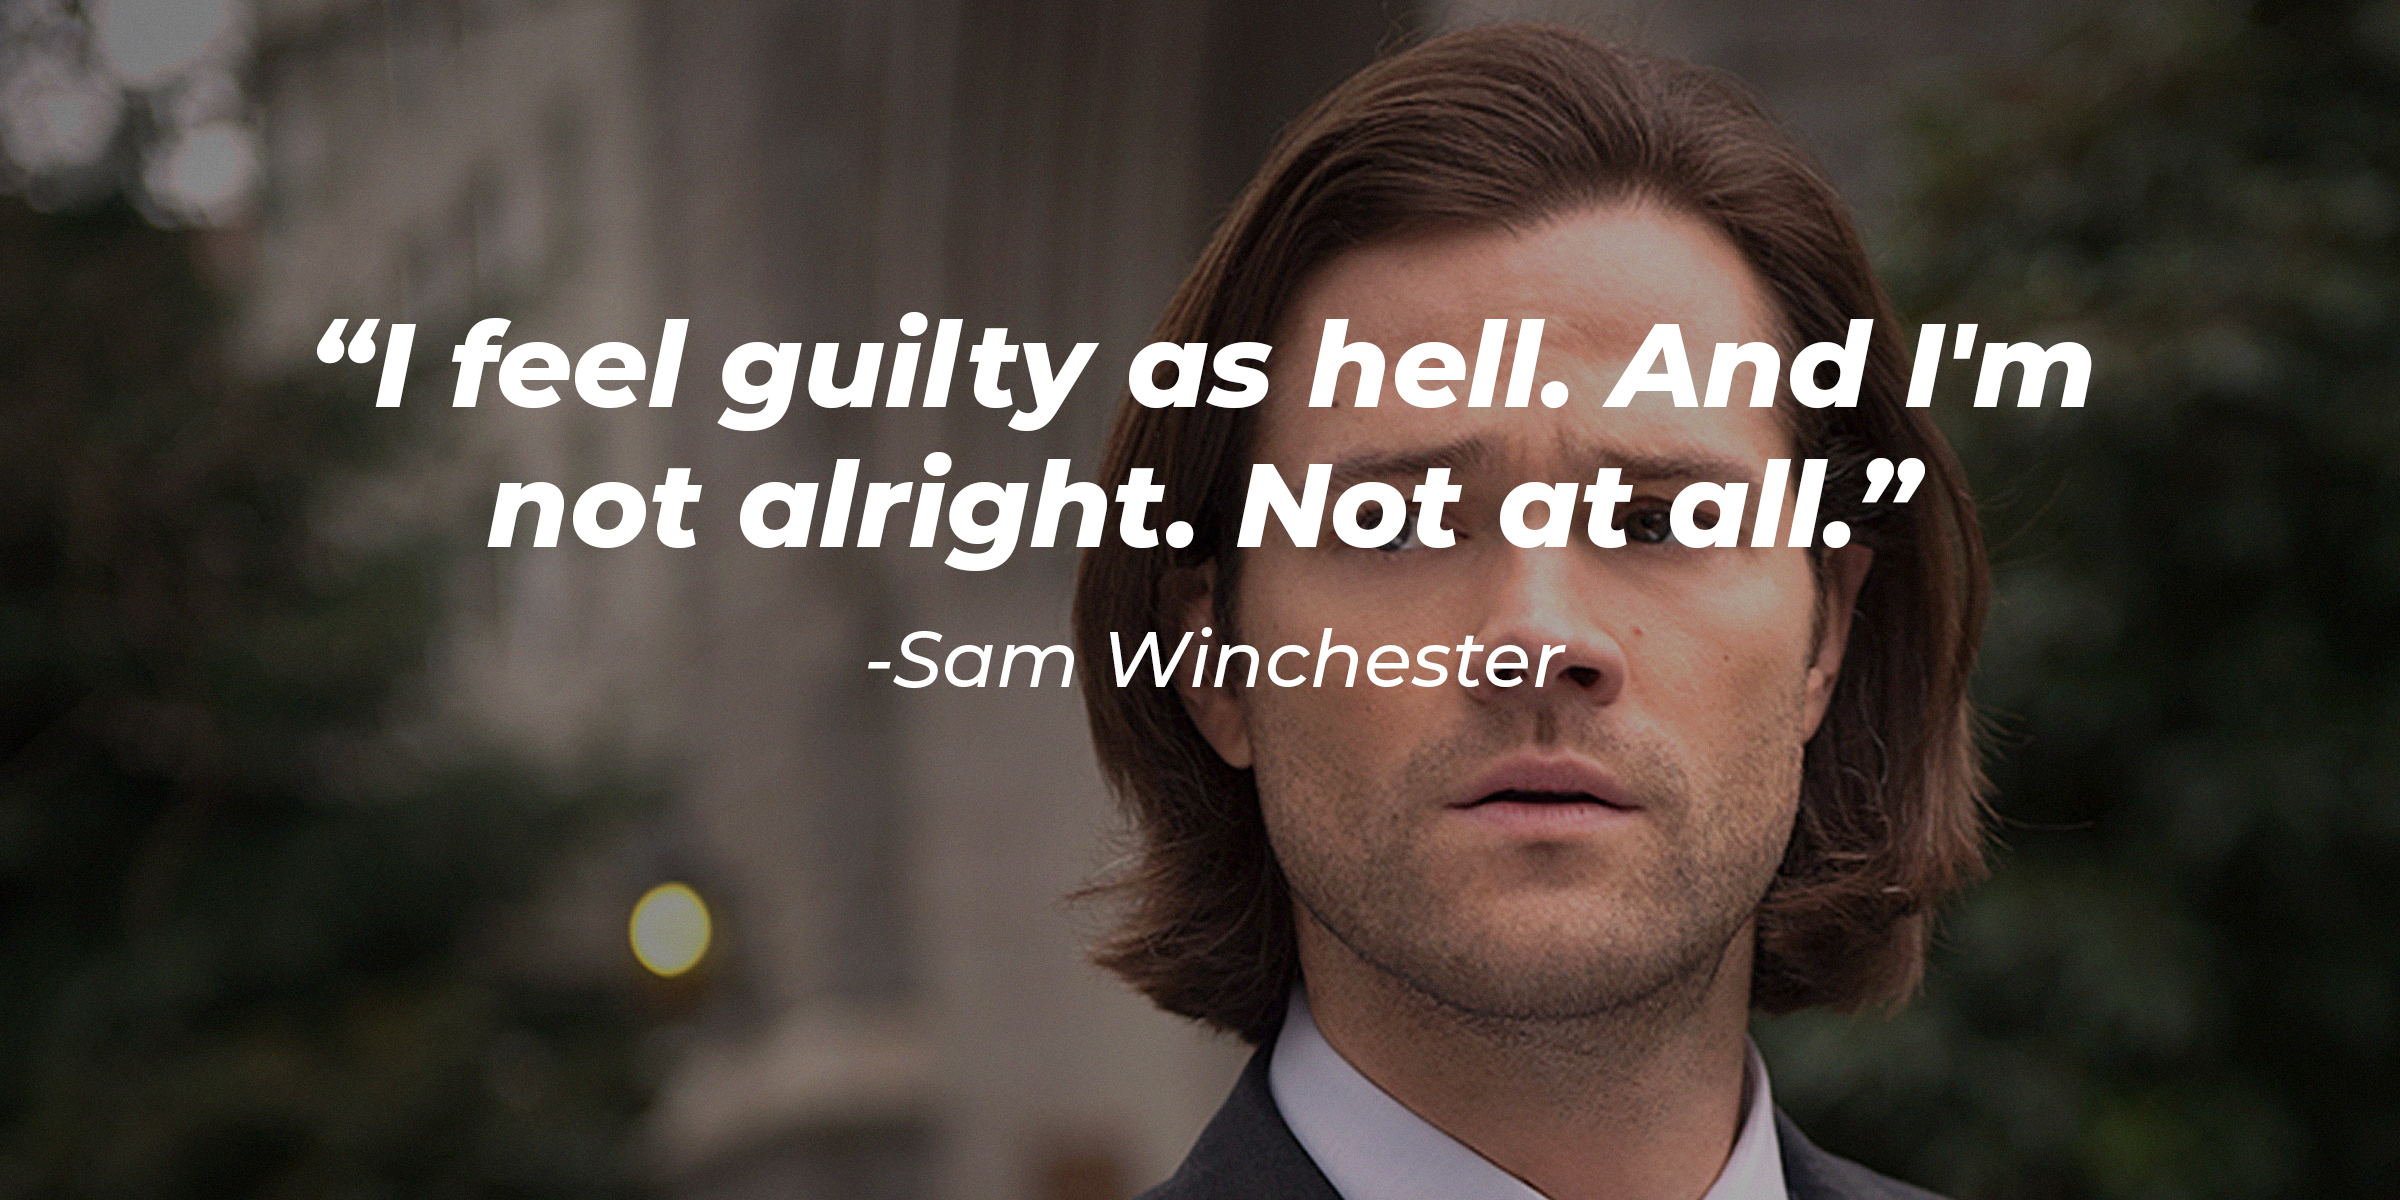 Sam Winchester with his quote: "I miss him, man. And I feel guilty as hell. And I'm not alright. Not at all." | Source: Facebook.com/Supernatural